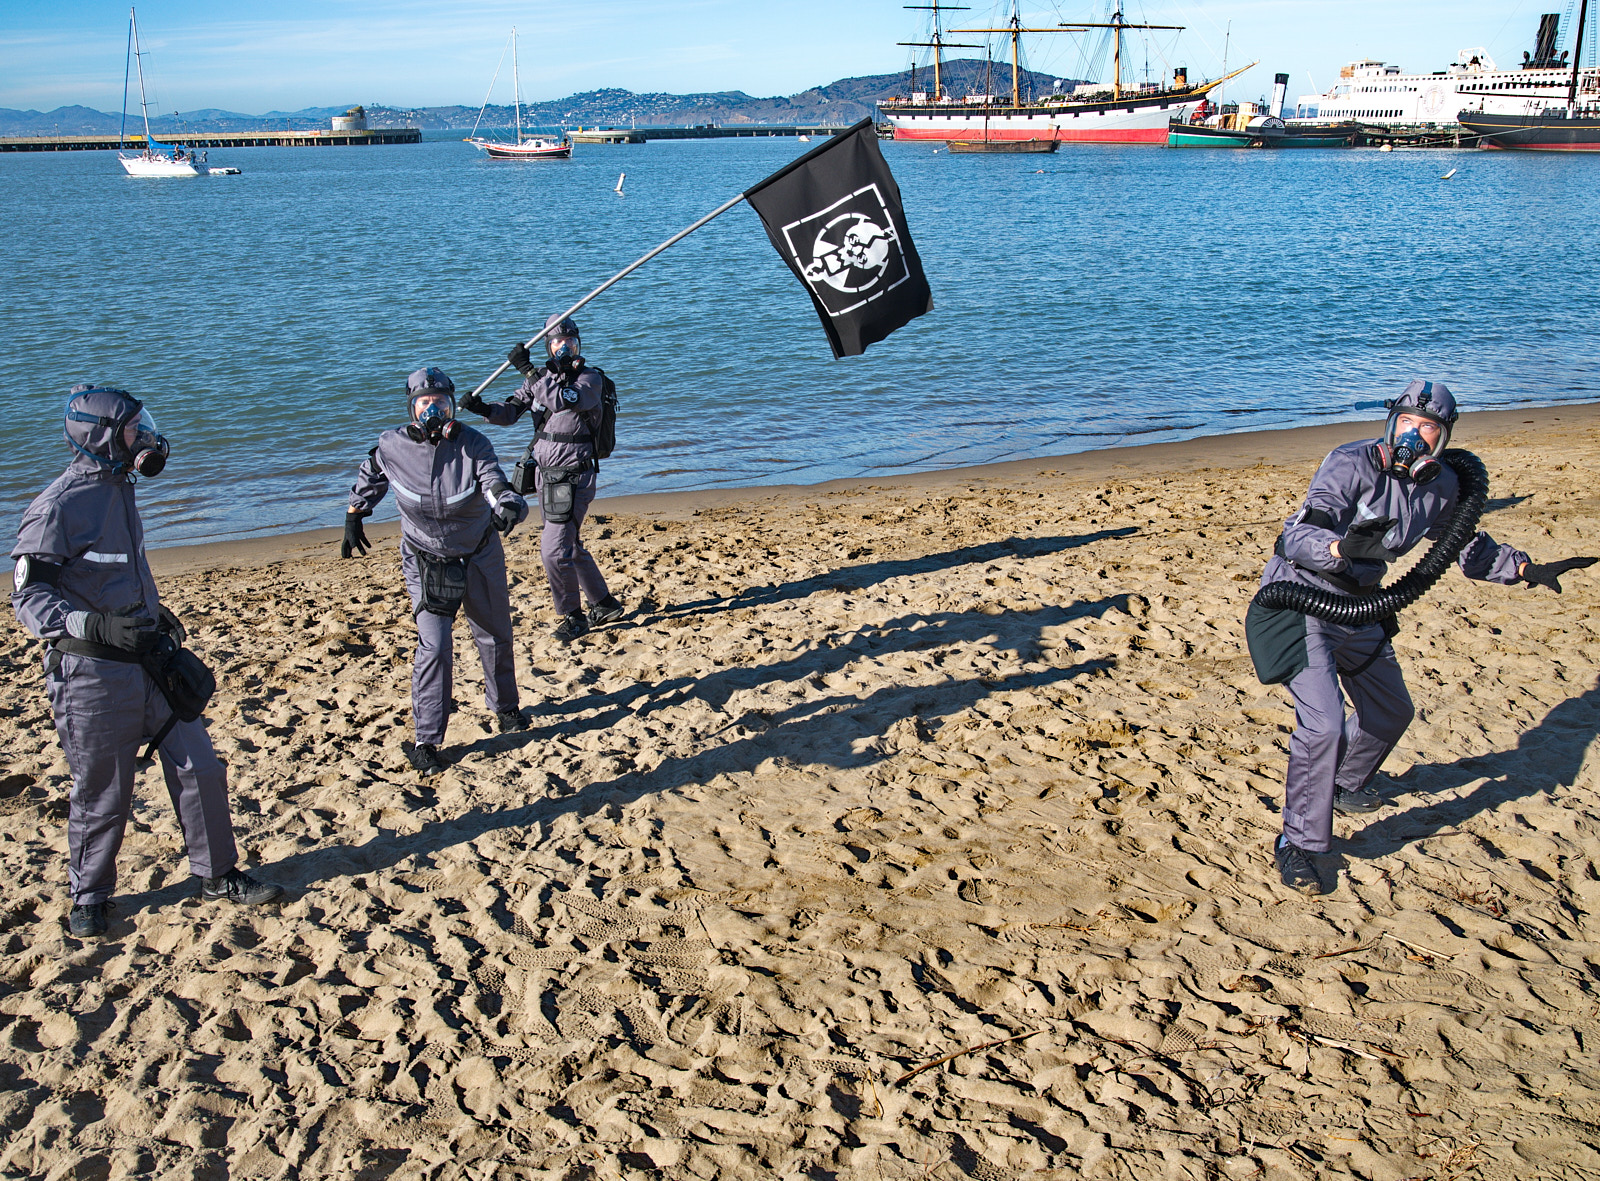 Xtractors dressed in grey hazmat suits stand on a beach with a black flag